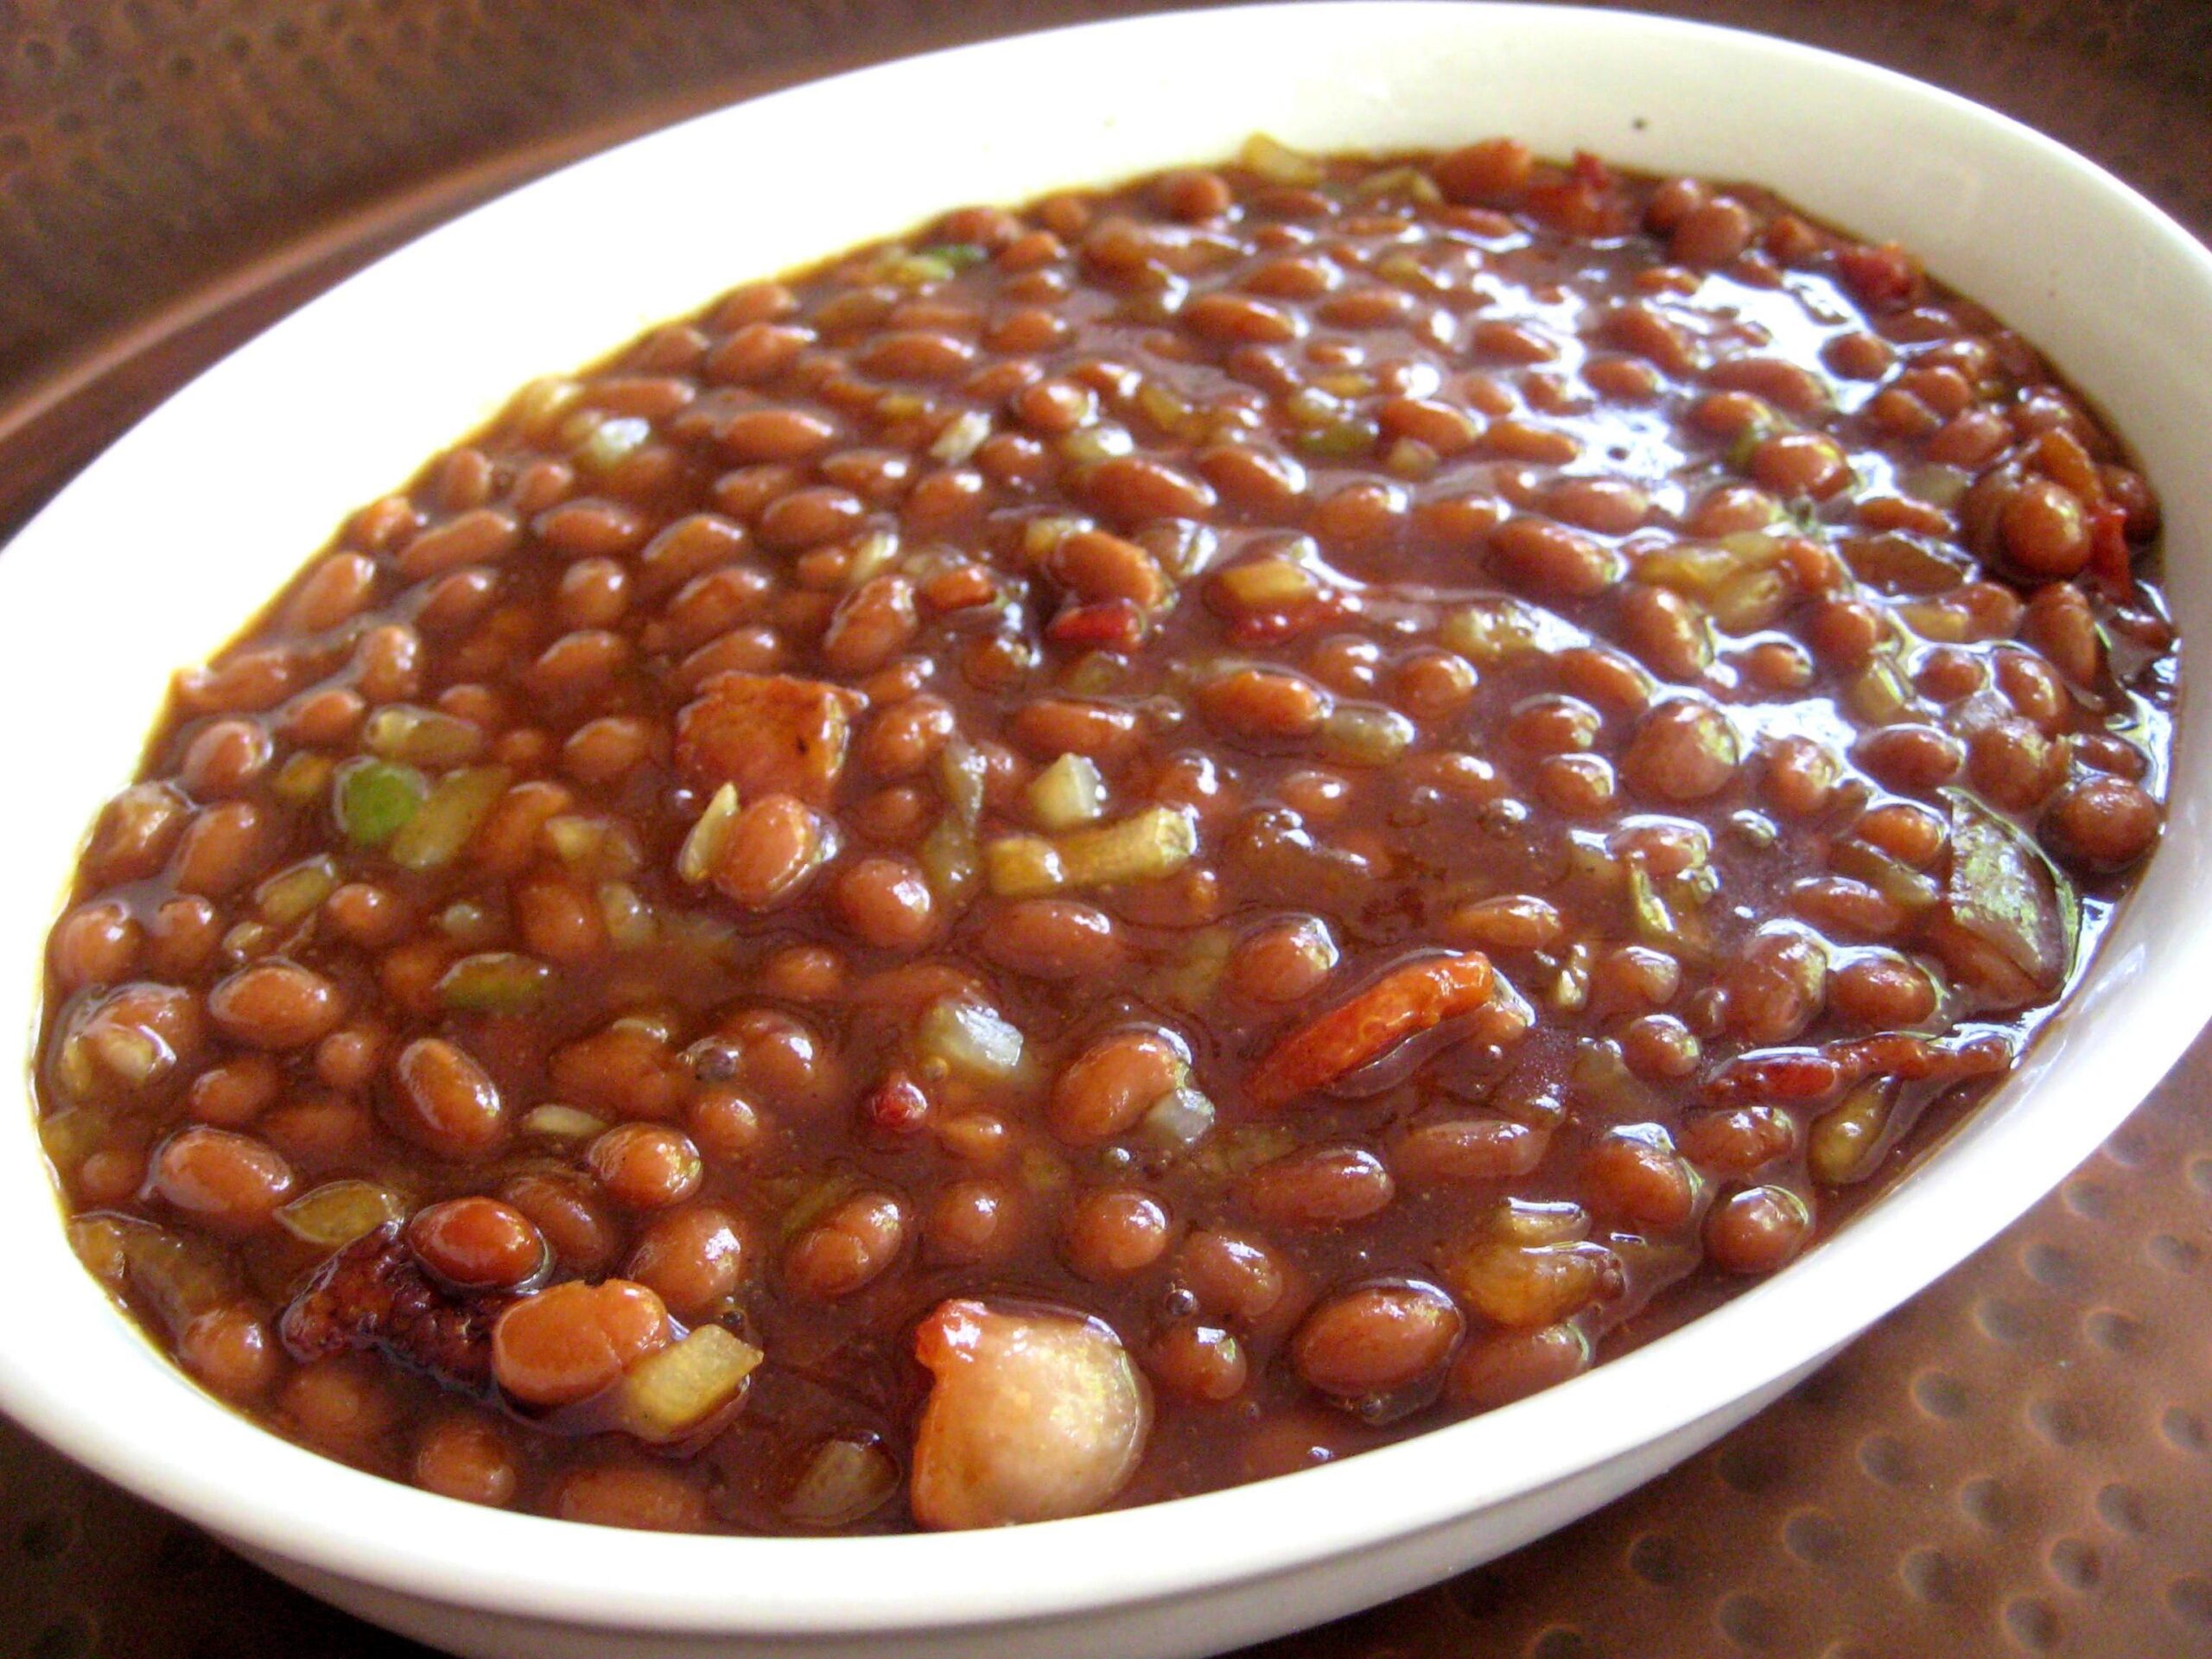  Every bite of these baked beans will transport you to a warm and sunny day in the south.